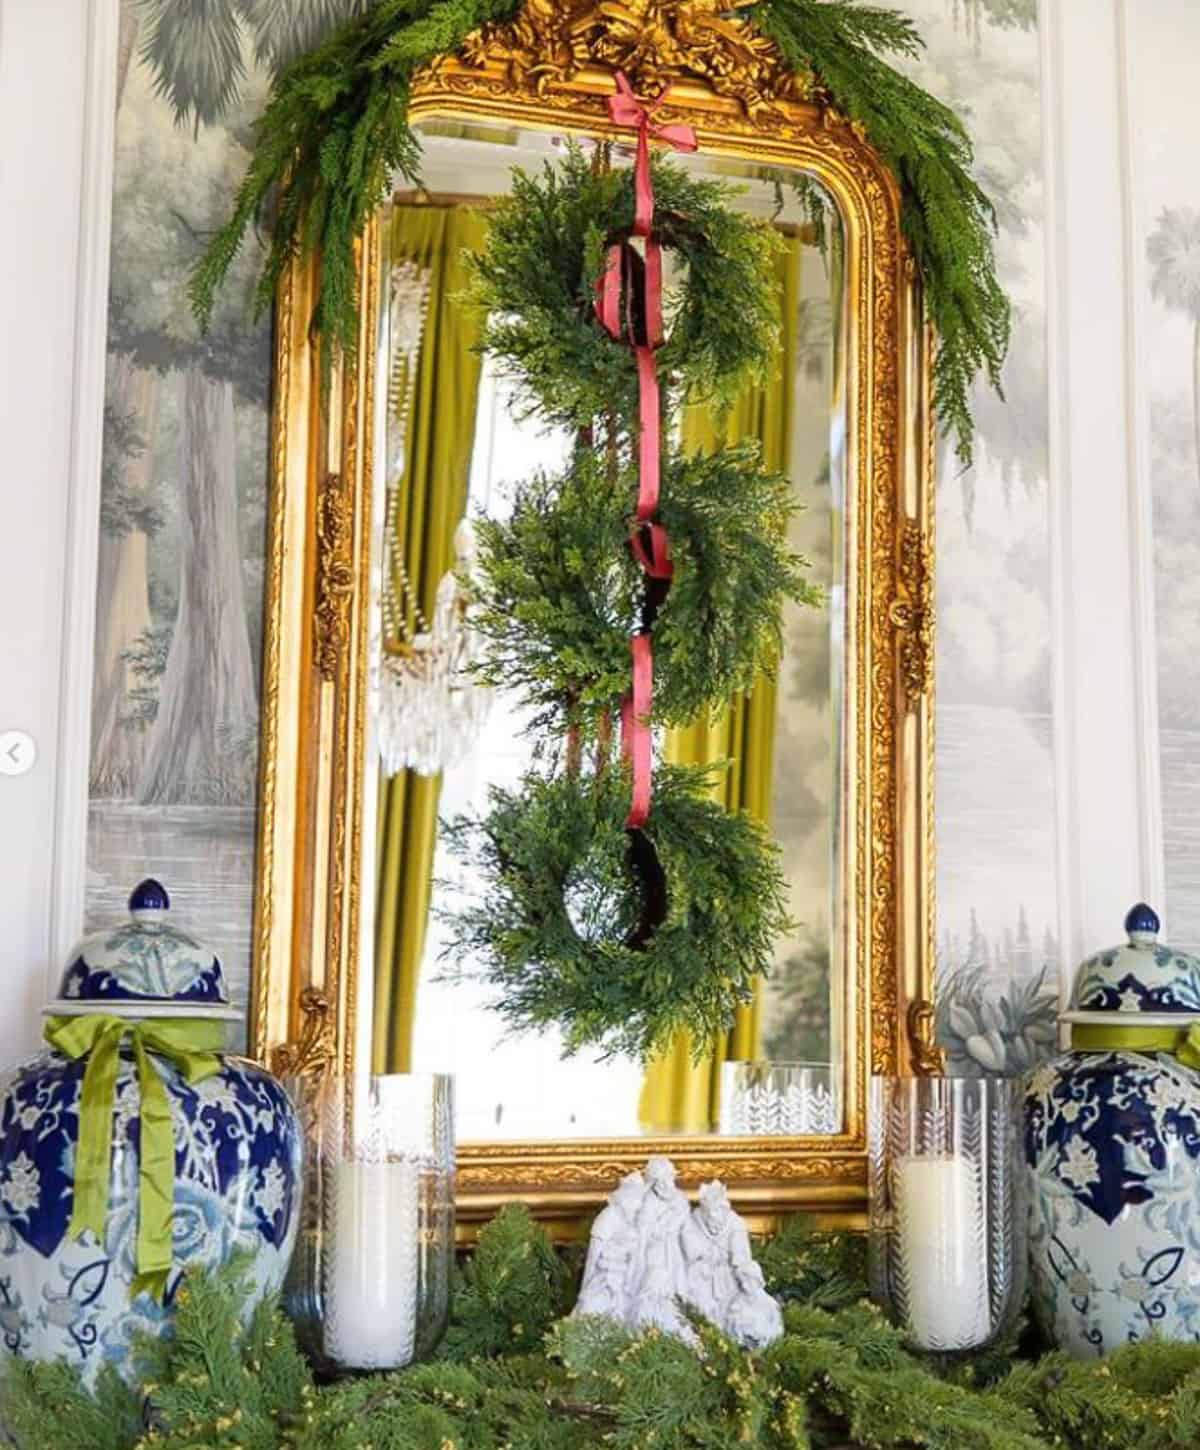 nativity scene display on a sideboard surrounded by faux greenery with a gold mirror and wreaths hanging above.